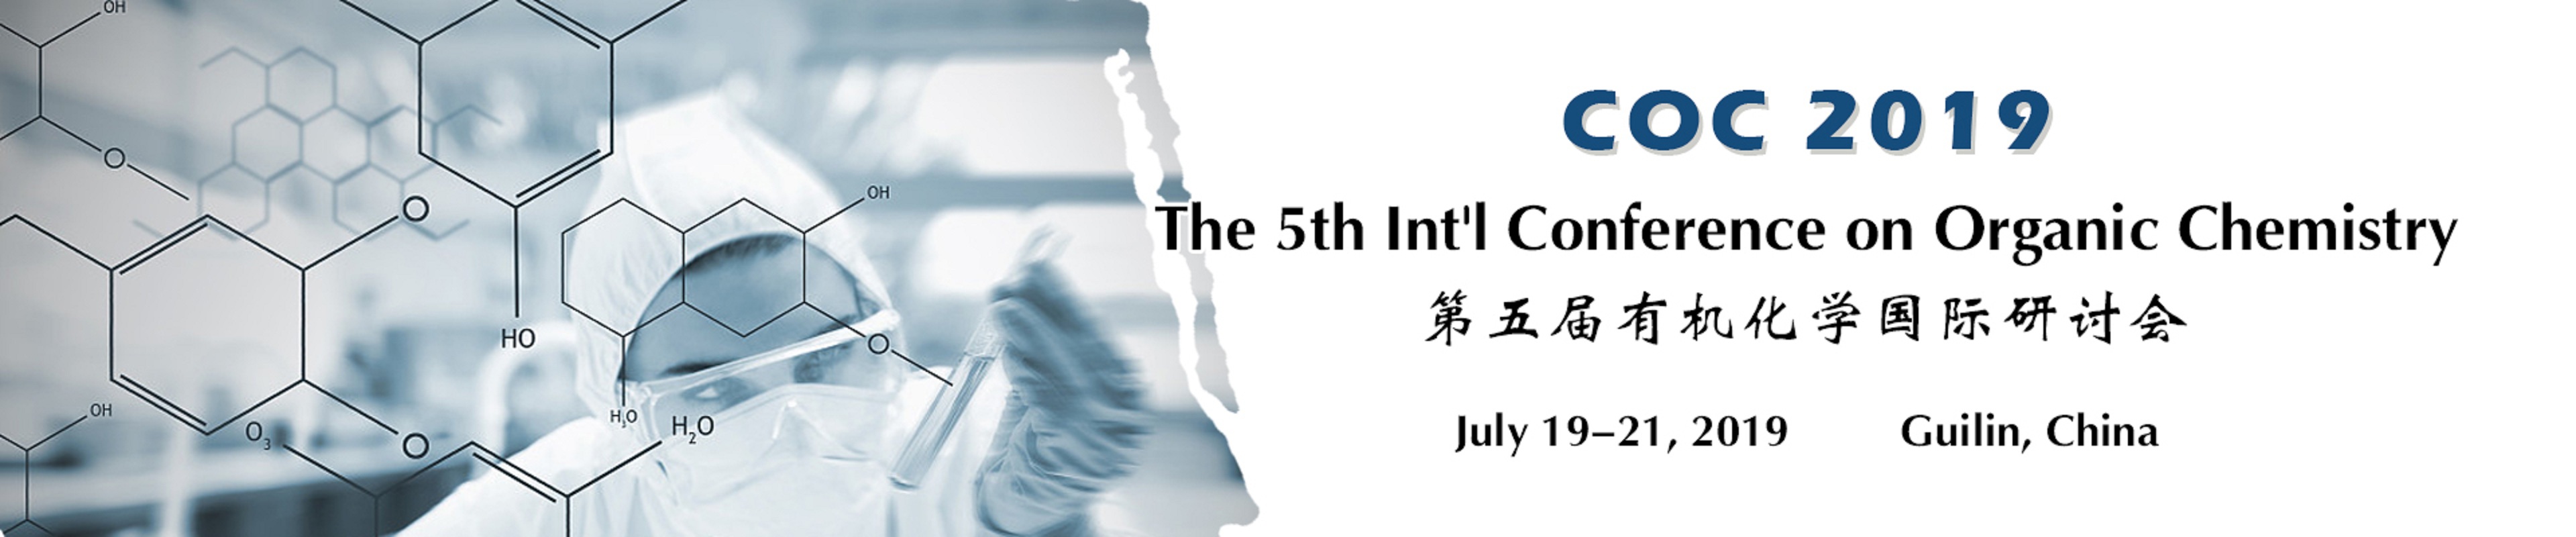 The 5th Int'l Conference on Organic Chemistry, Guilin, Guangxi, China